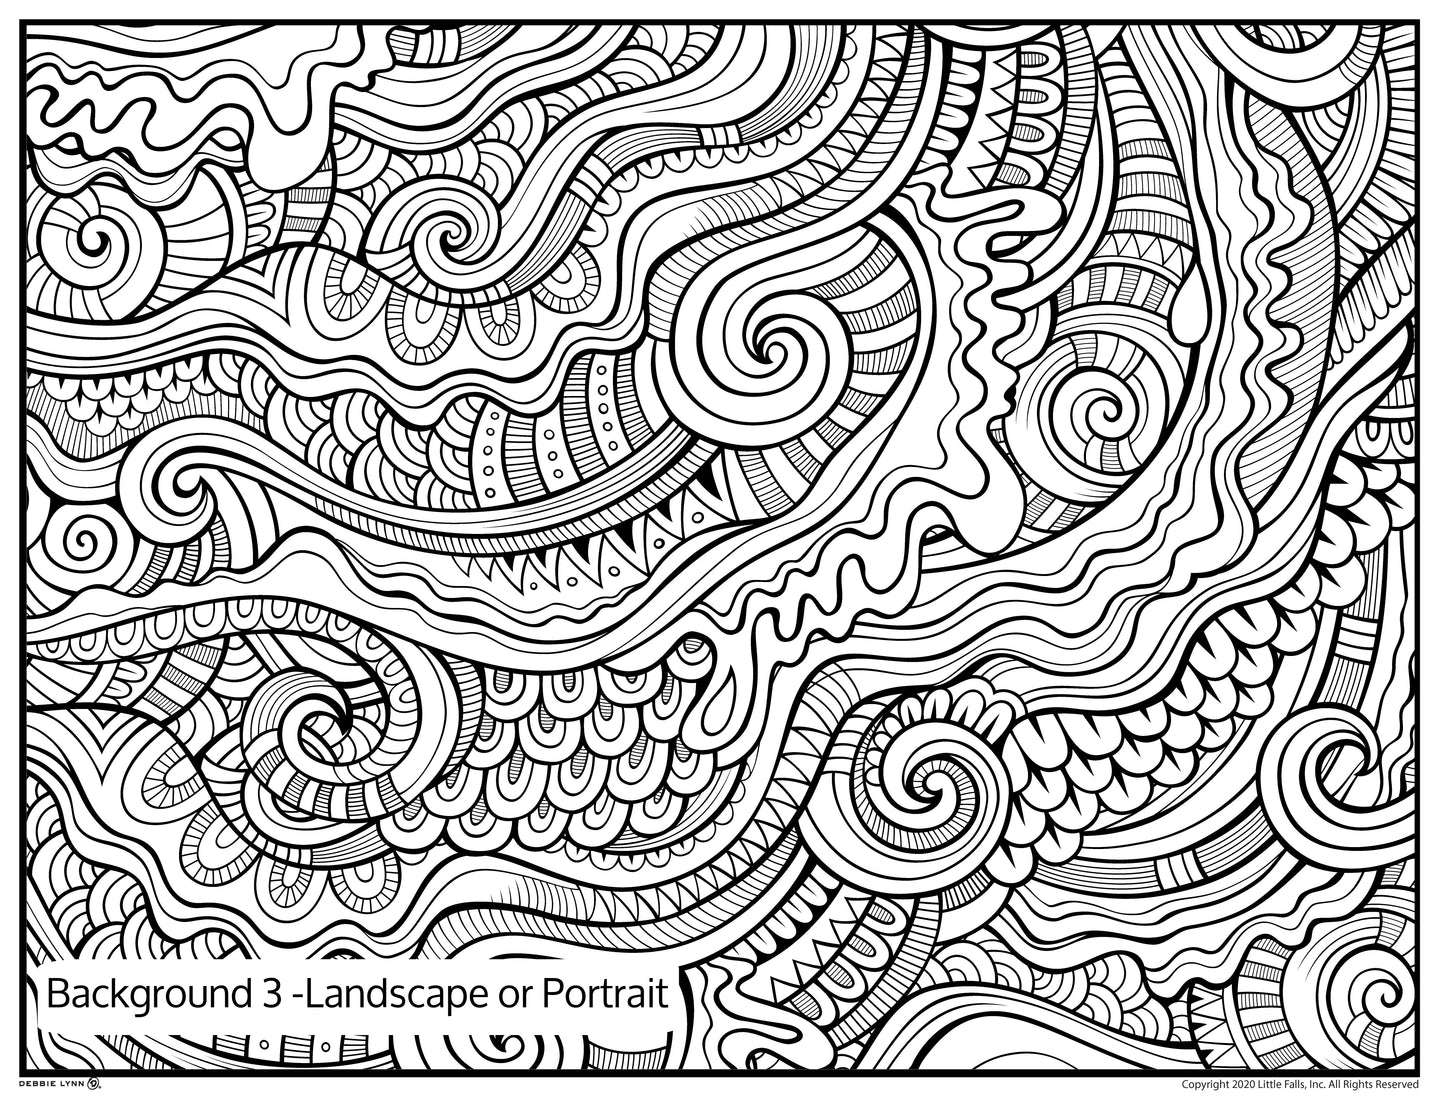 Background 3 Custom Personalized Giant Coloring Poster 46"x60"